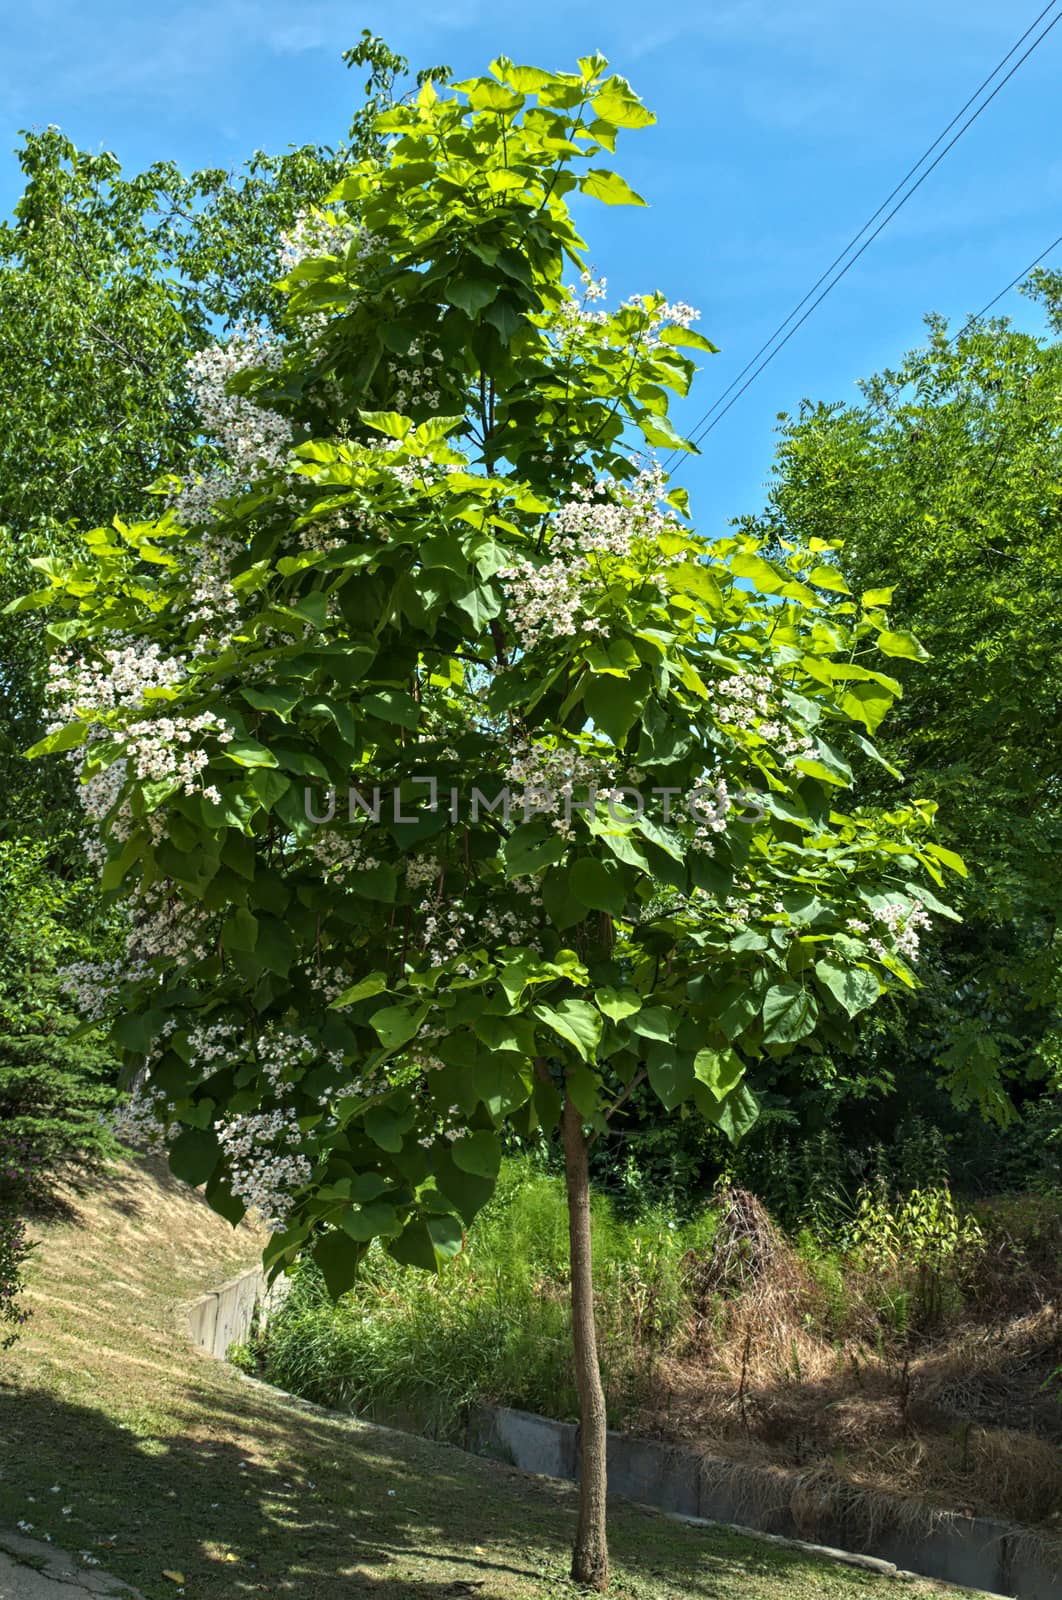 Catalpa tree blooming with big clusters of white flowers